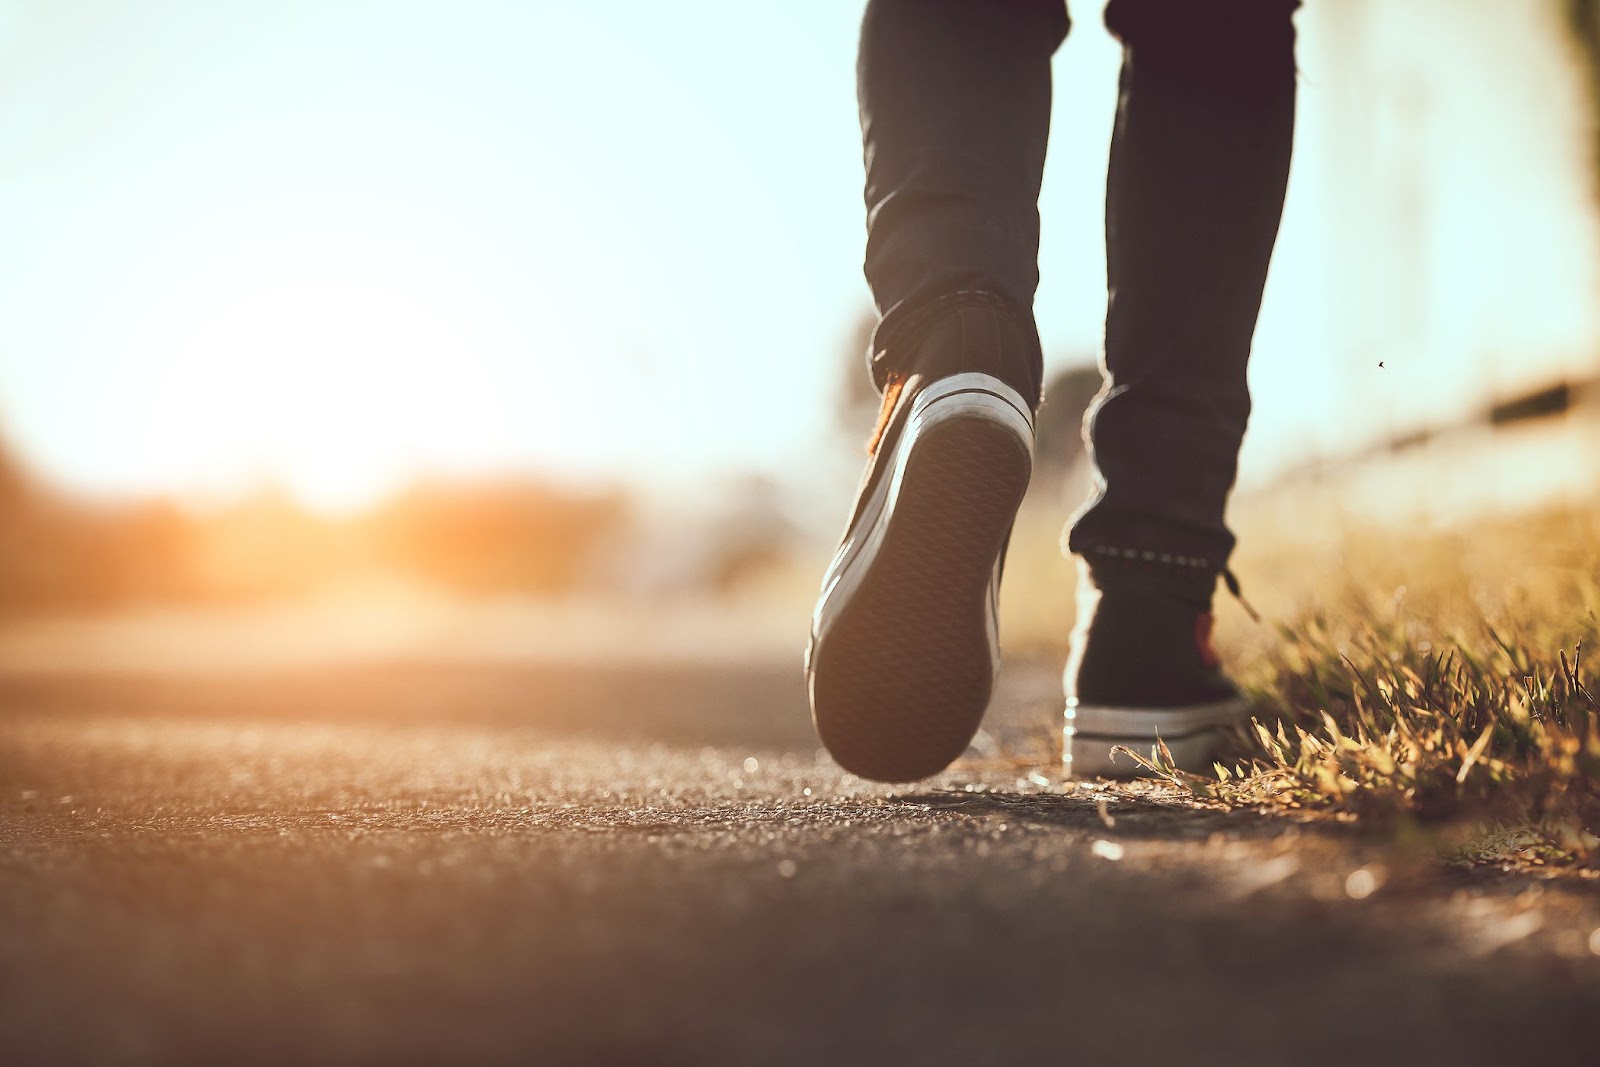 Close up shot of a person wearing sneakers and going for a walk outside